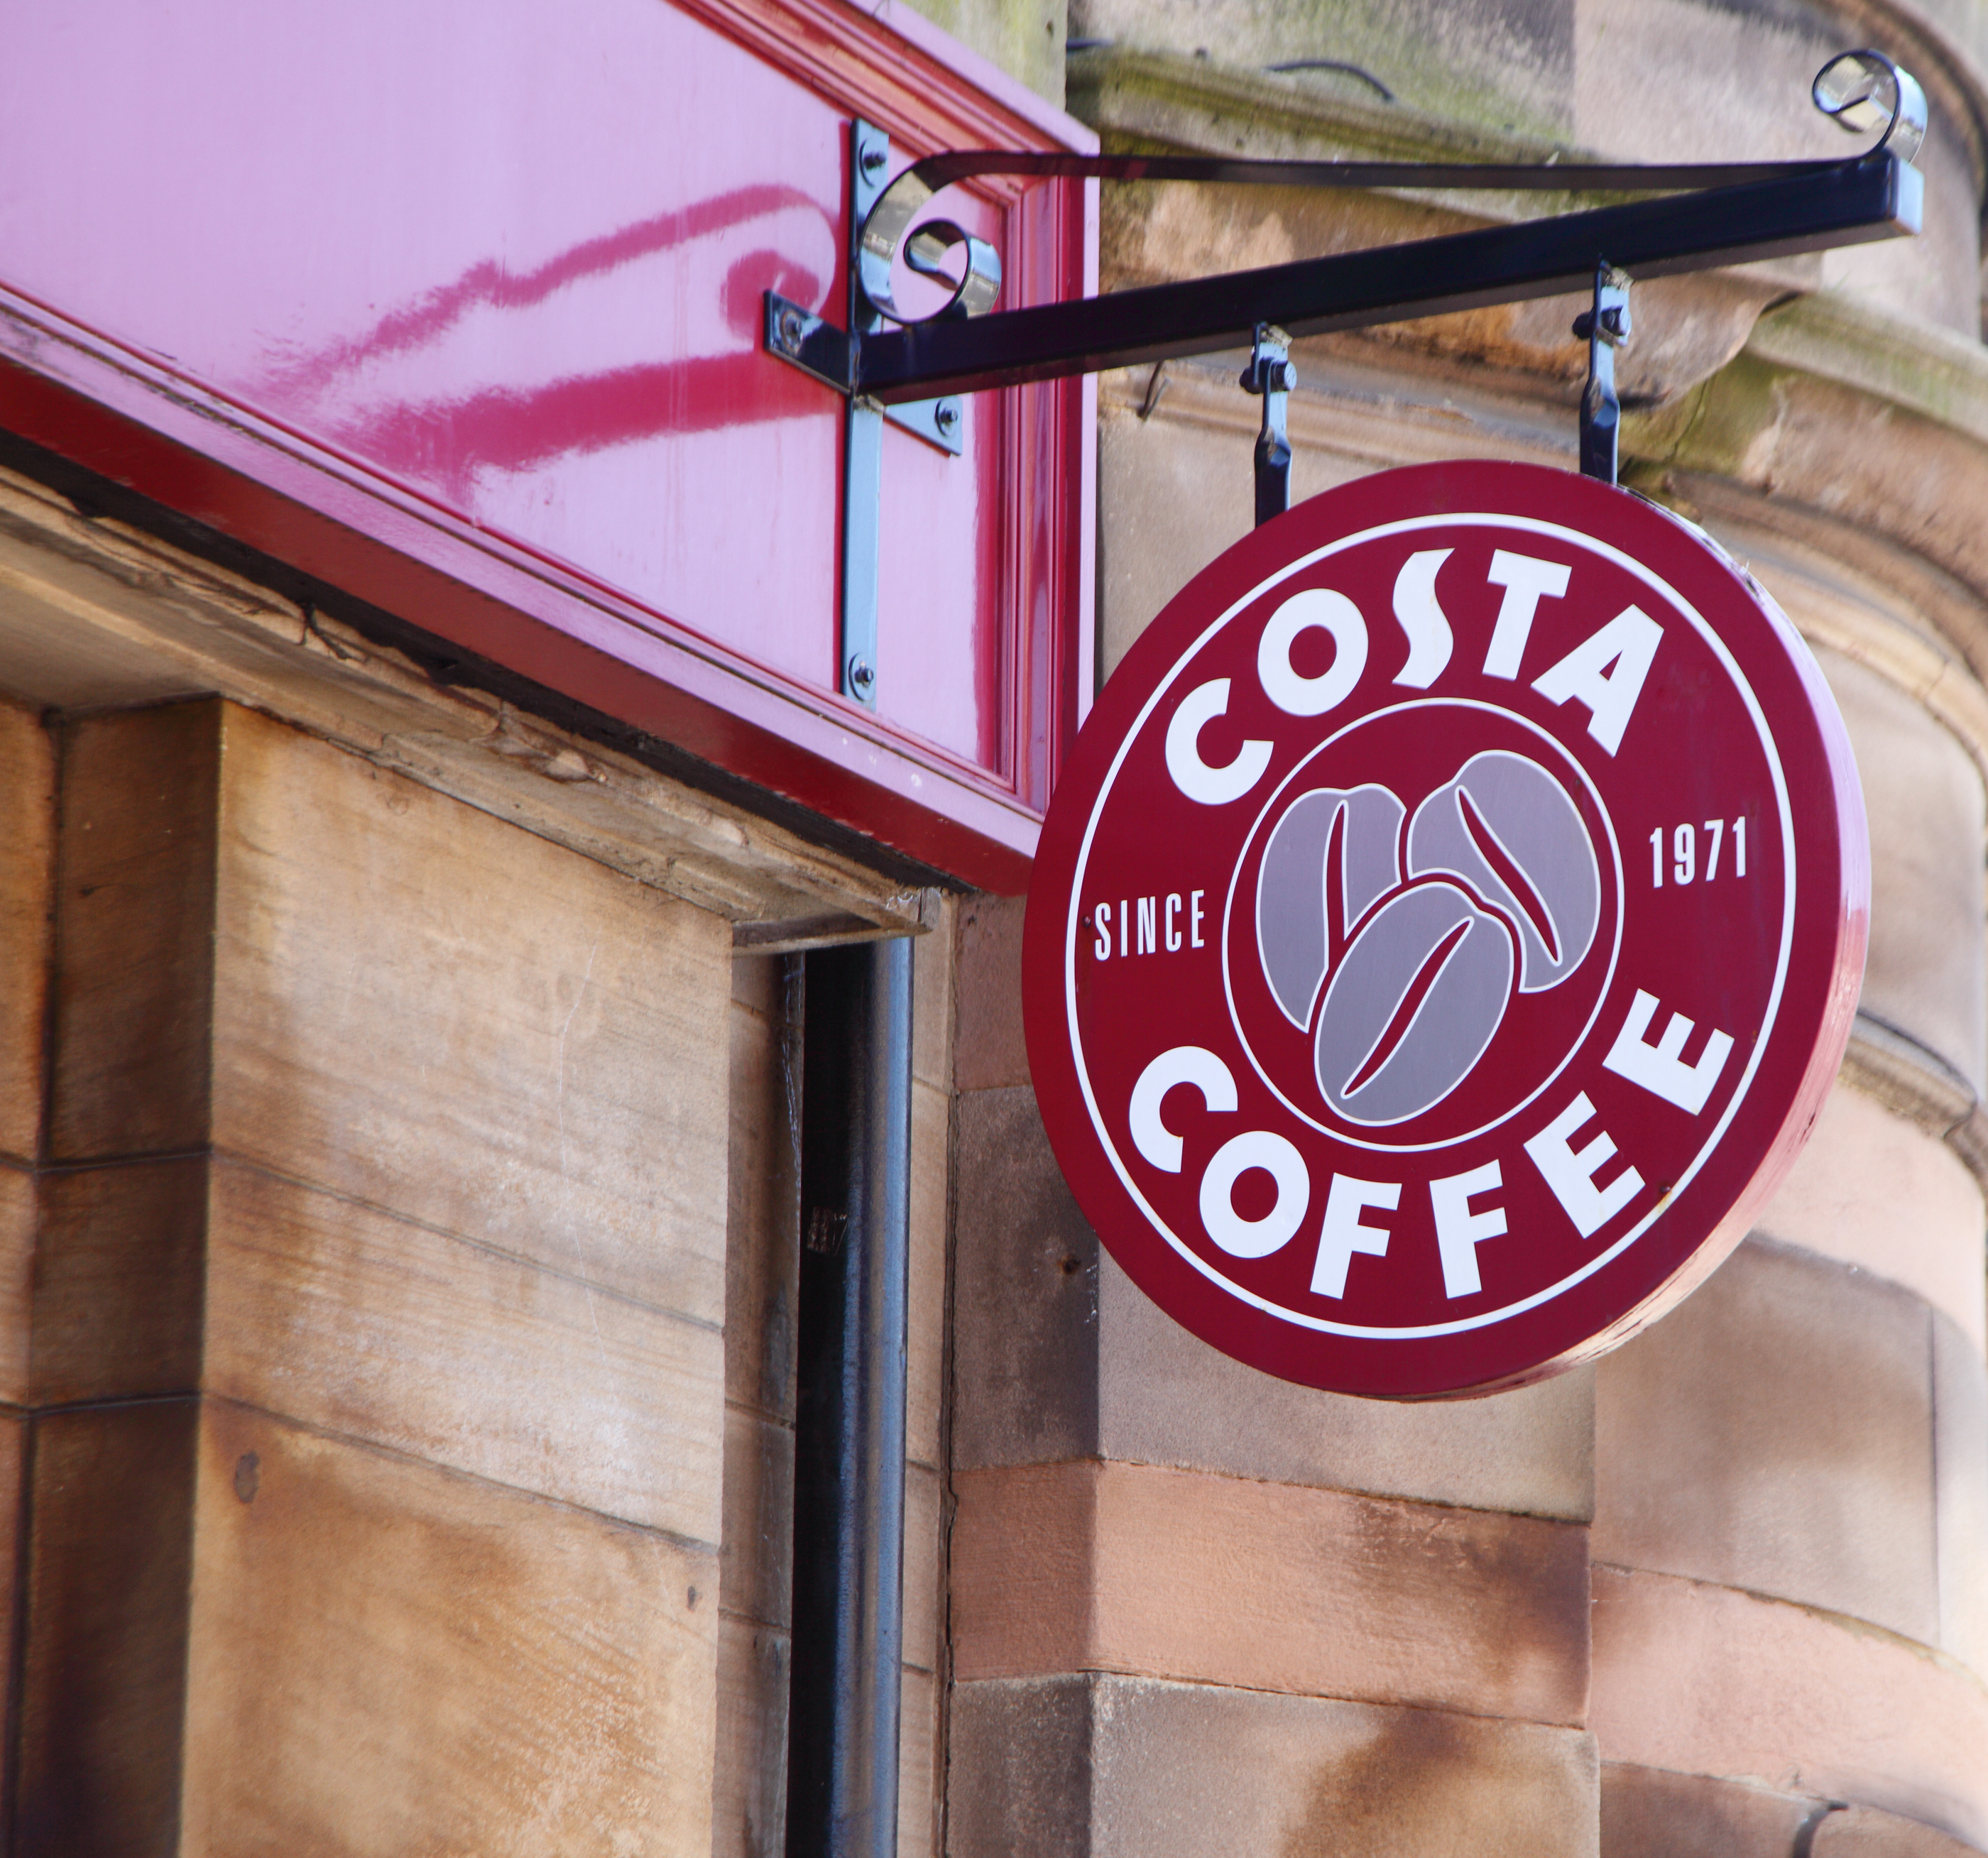 Costa Coffee is pulling down the shutters on one of its branches in just days